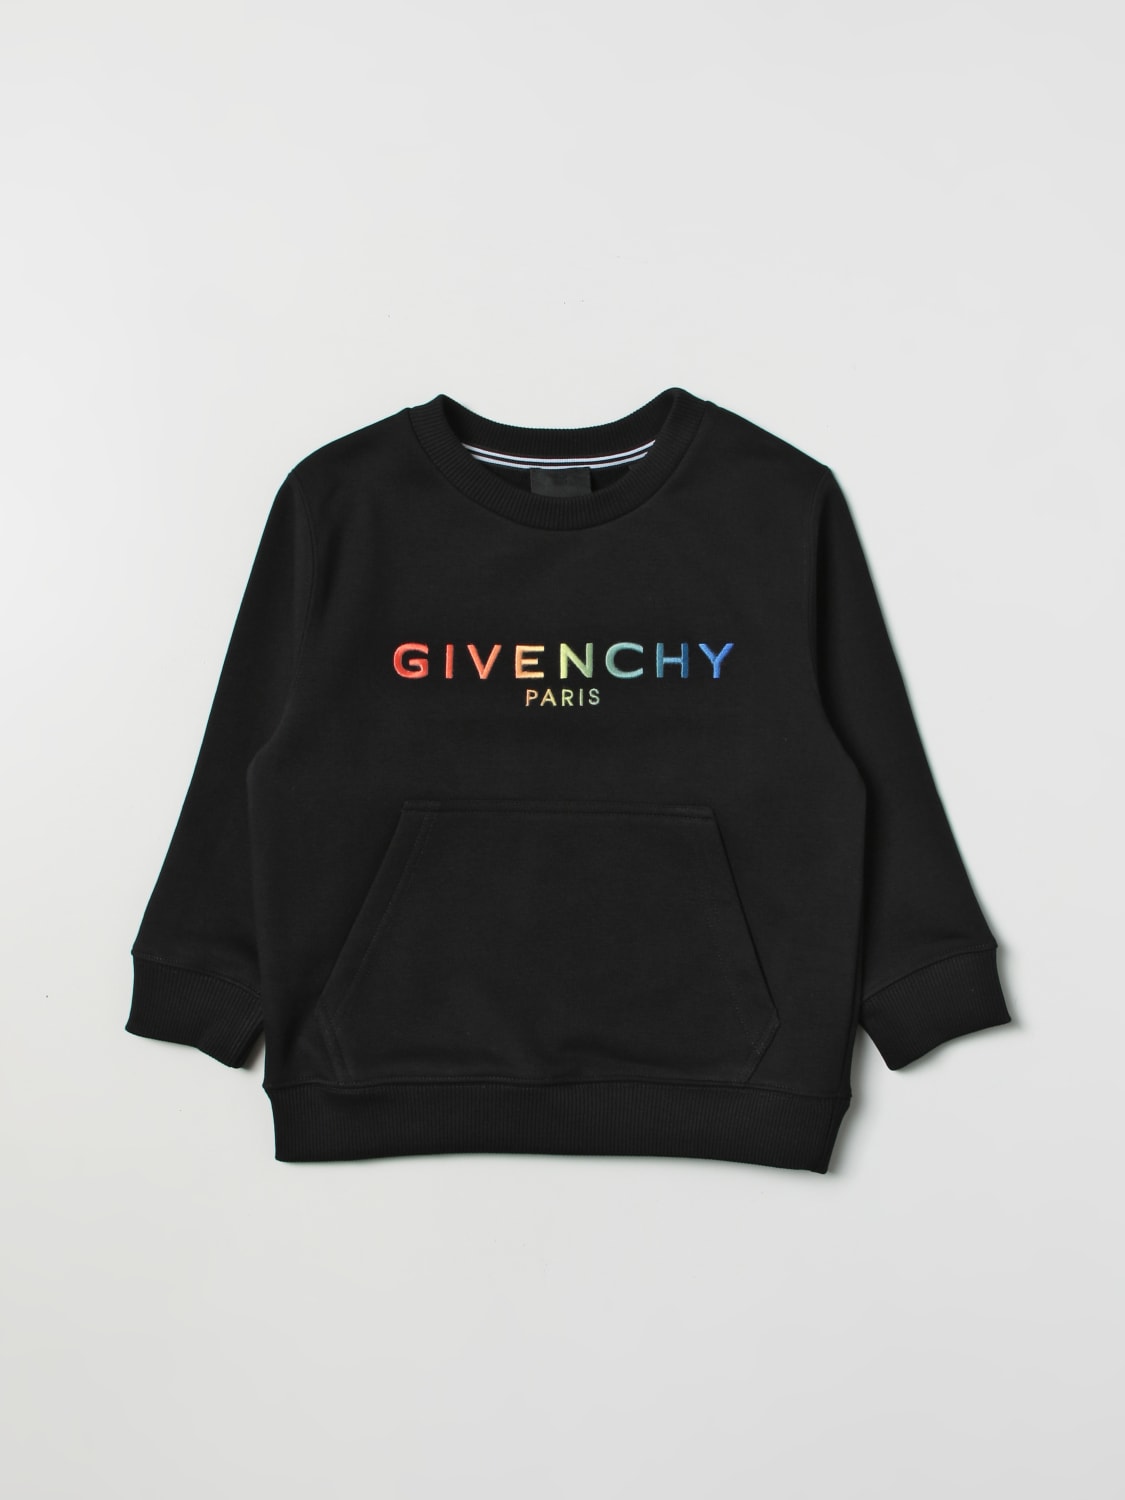 Givenchy sweater for boys